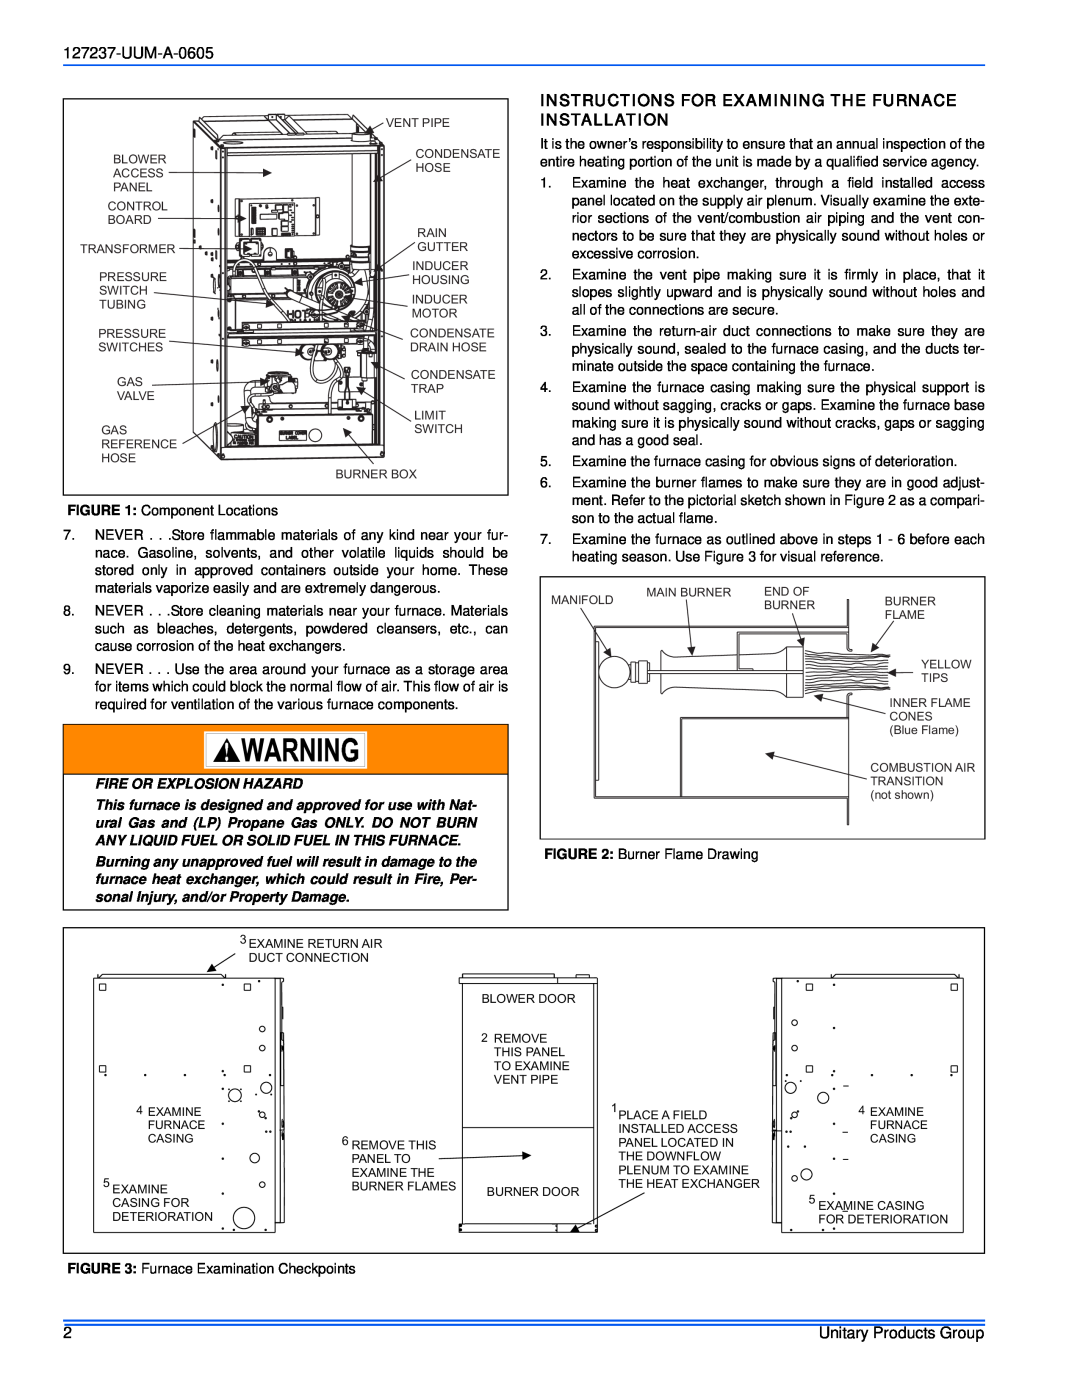 White Rodgers FC9S, PS9, FL9S service manual Instructions For Examining The Furnace, Installation, Fire Or Explosion Hazard 